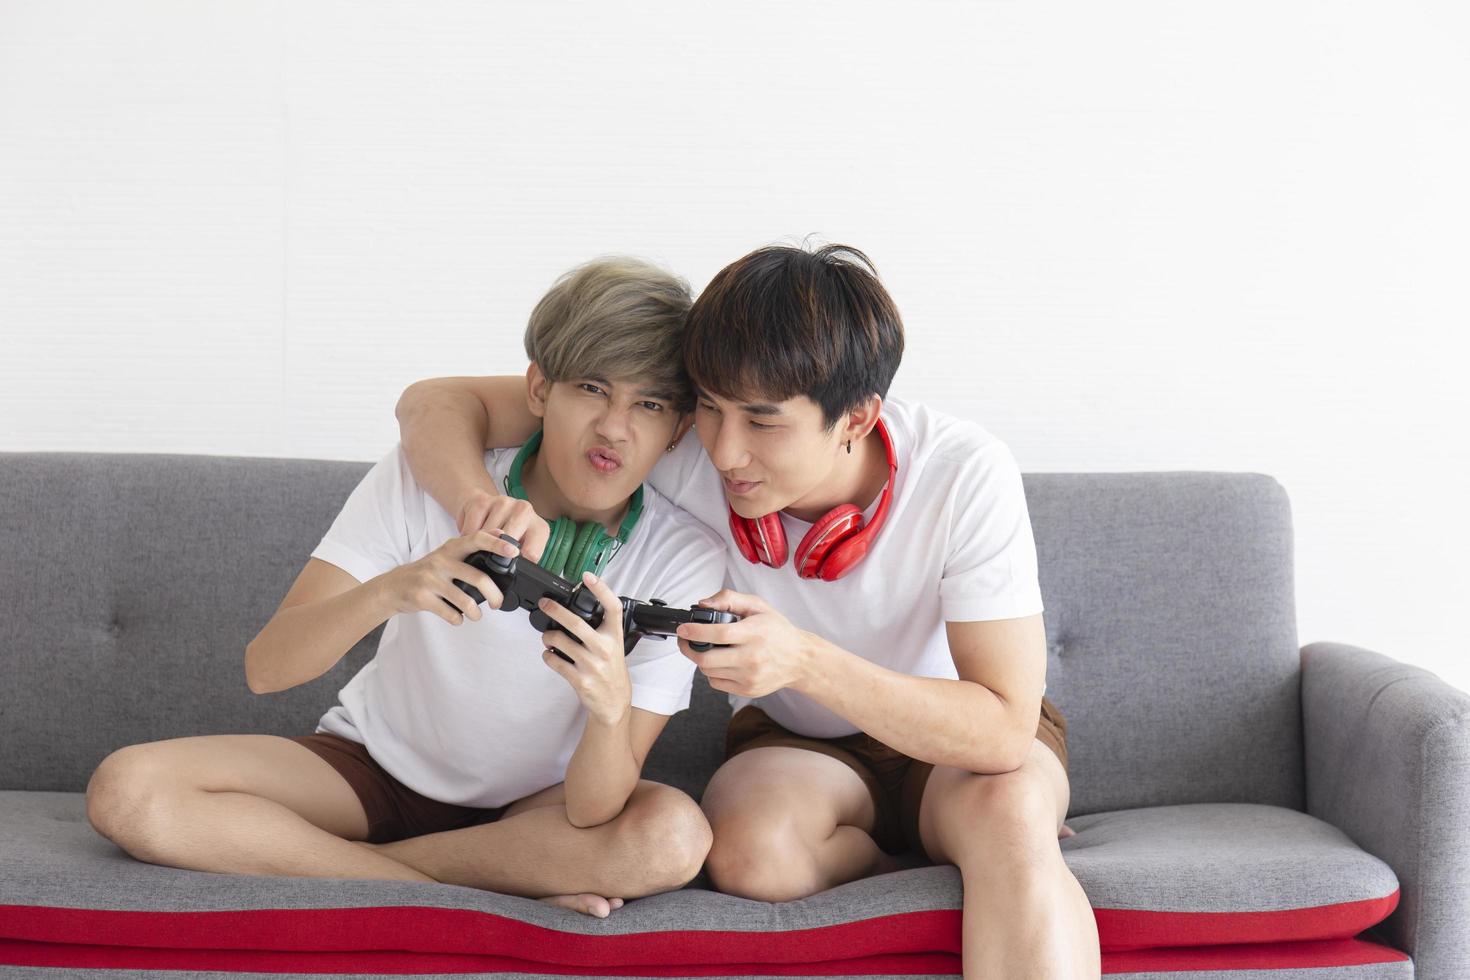 A male couple with an Asian man sitting on a sofa playing video games having fun. photo